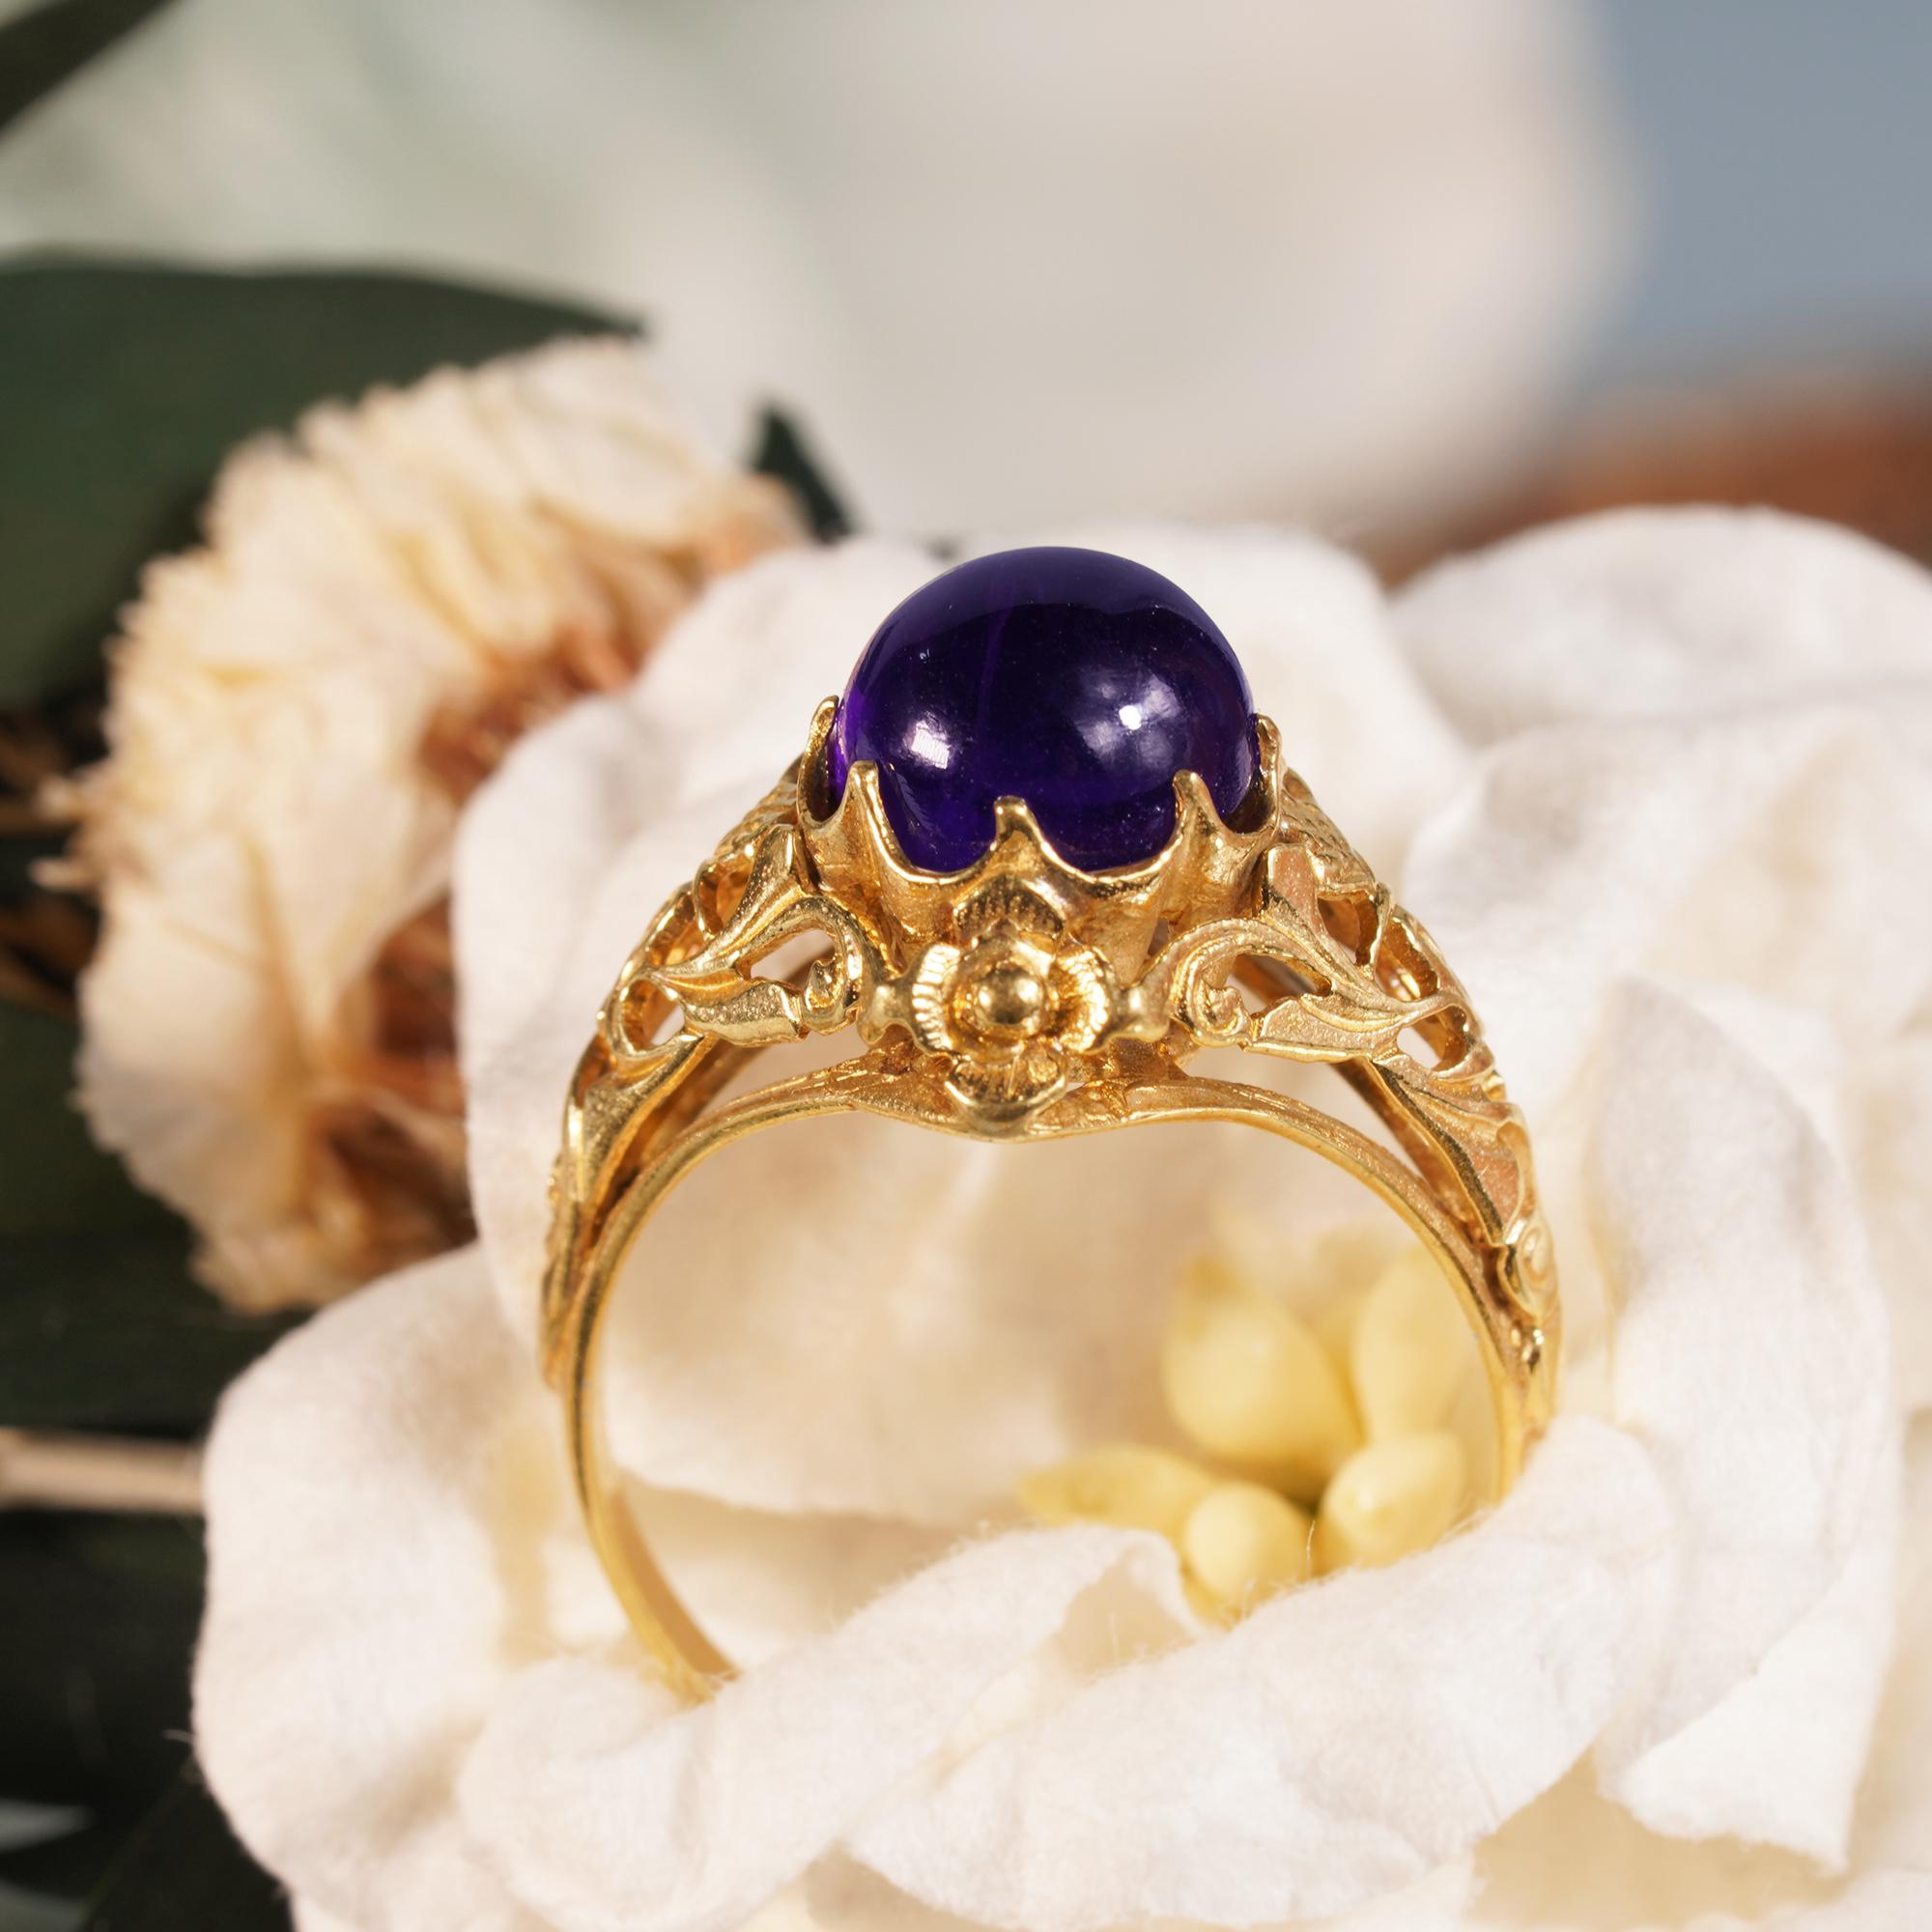 For Sale:  Natural Cabochon Amethyst Vintage Style Filigree Ring in Solid 9K Yellow Gold 8